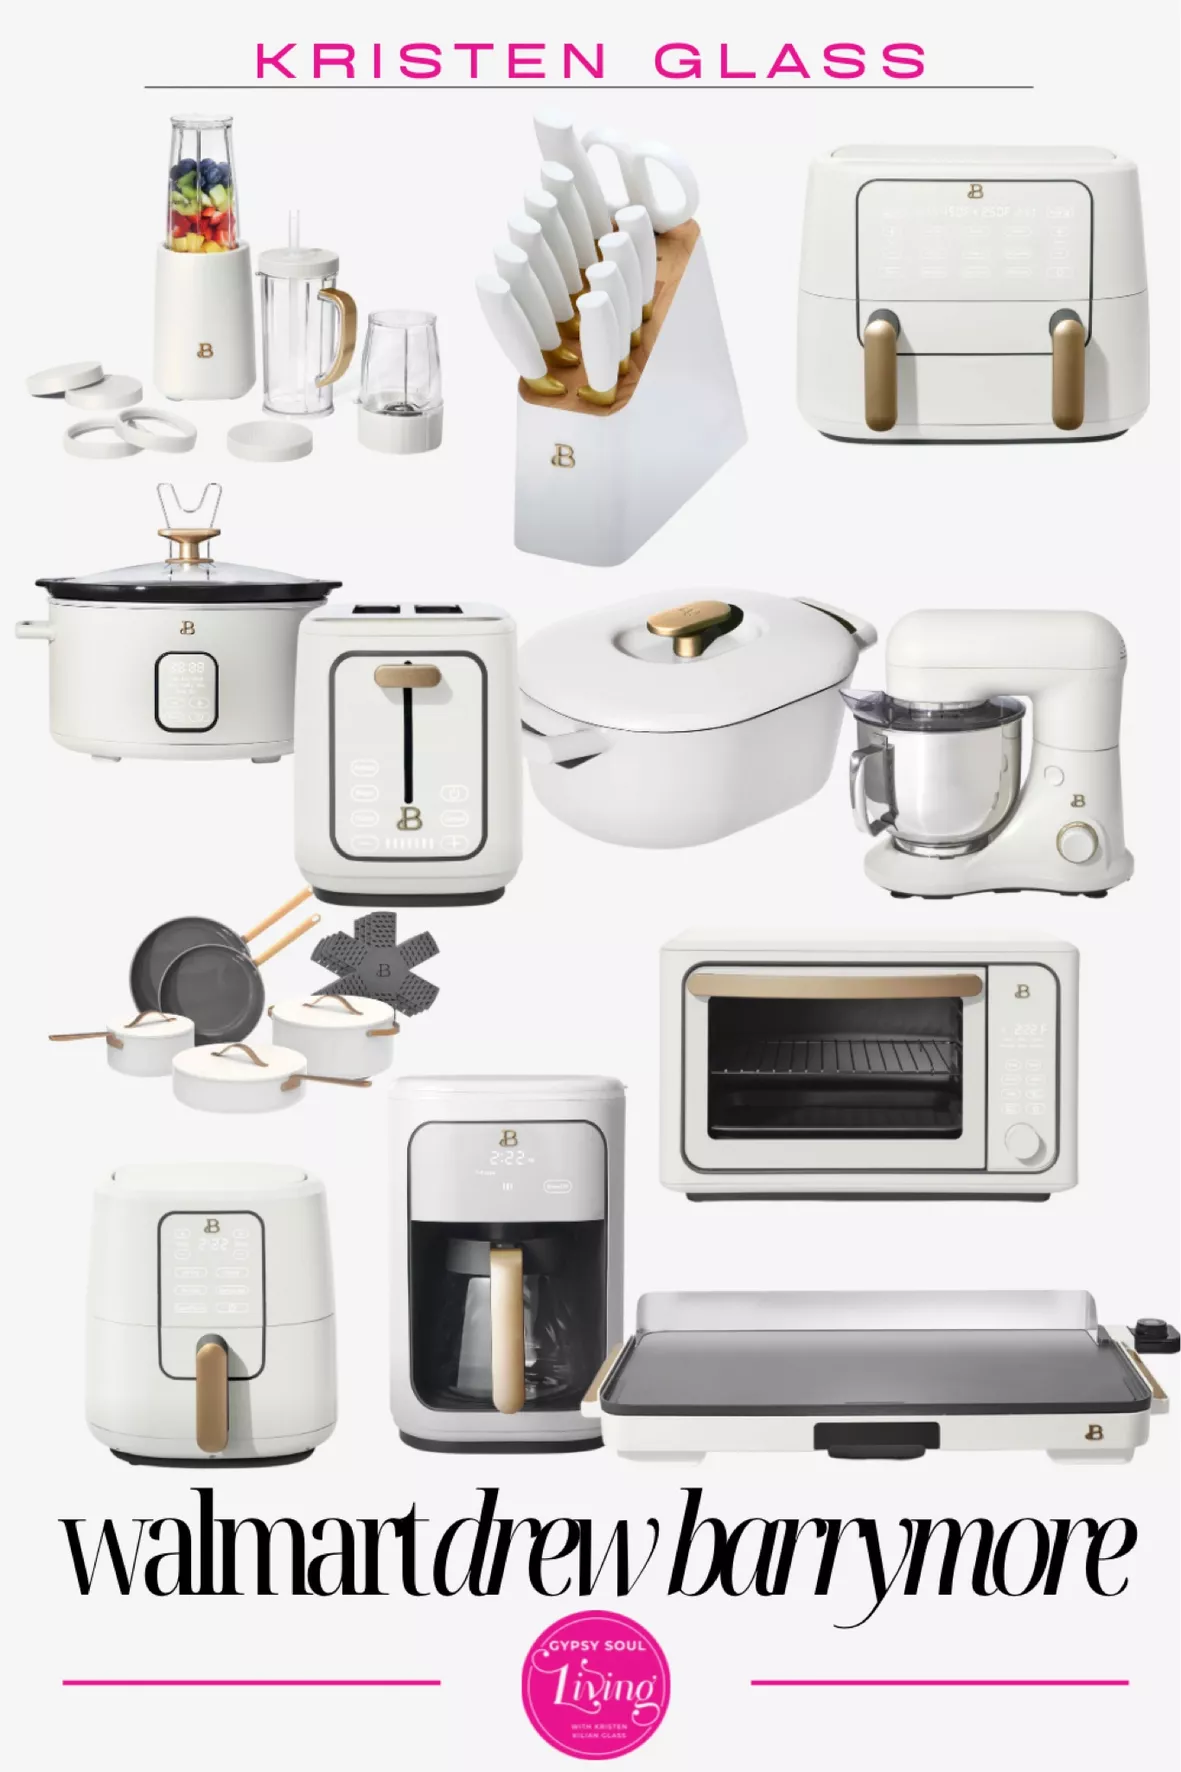 Drew Barrymore Just Launched the Cutest Small Appliances (They're